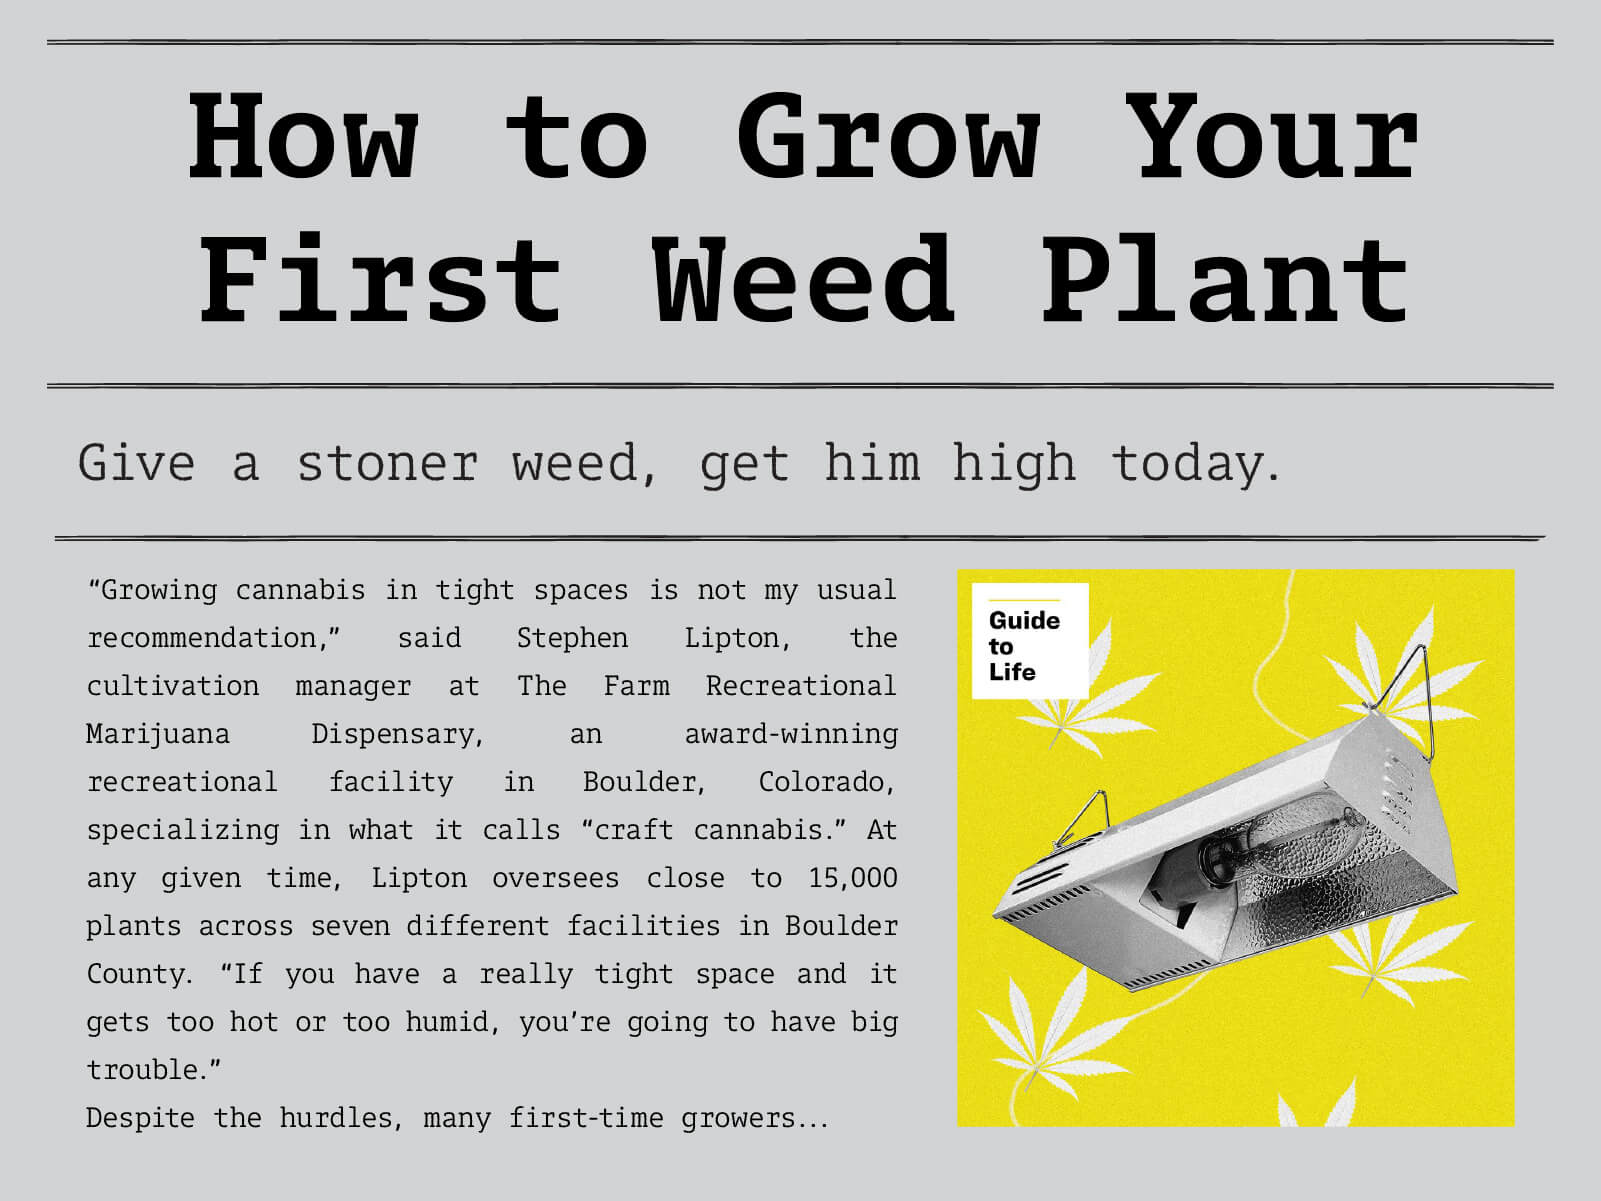 How to Grow Your First Weed Plant. Give a stoner weed, get him high today. Click to read more.